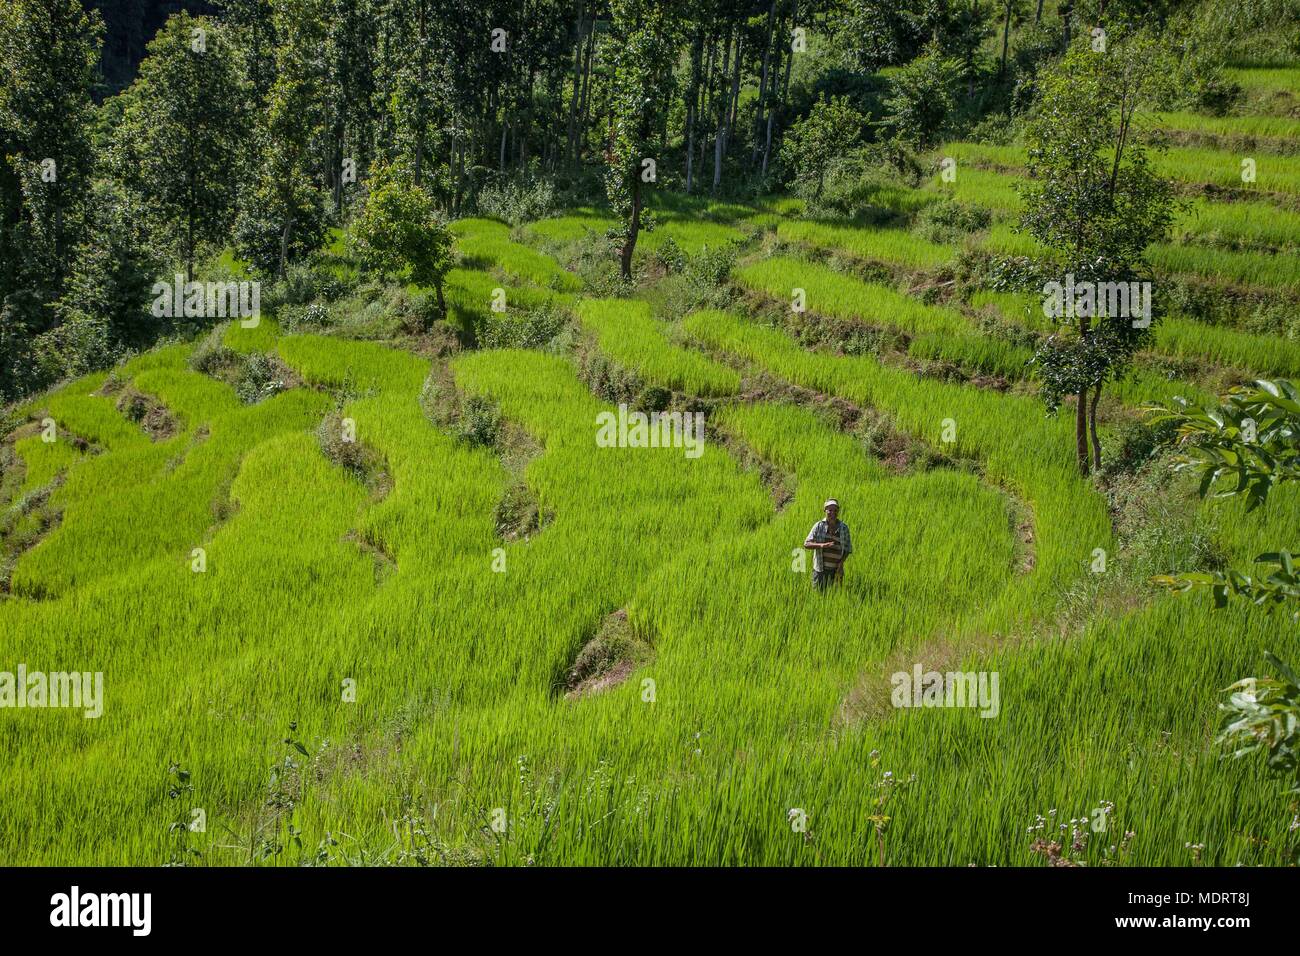 A rice farmer works amongst terraced paddy fields in the Dhading District of Nepal Stock Photo